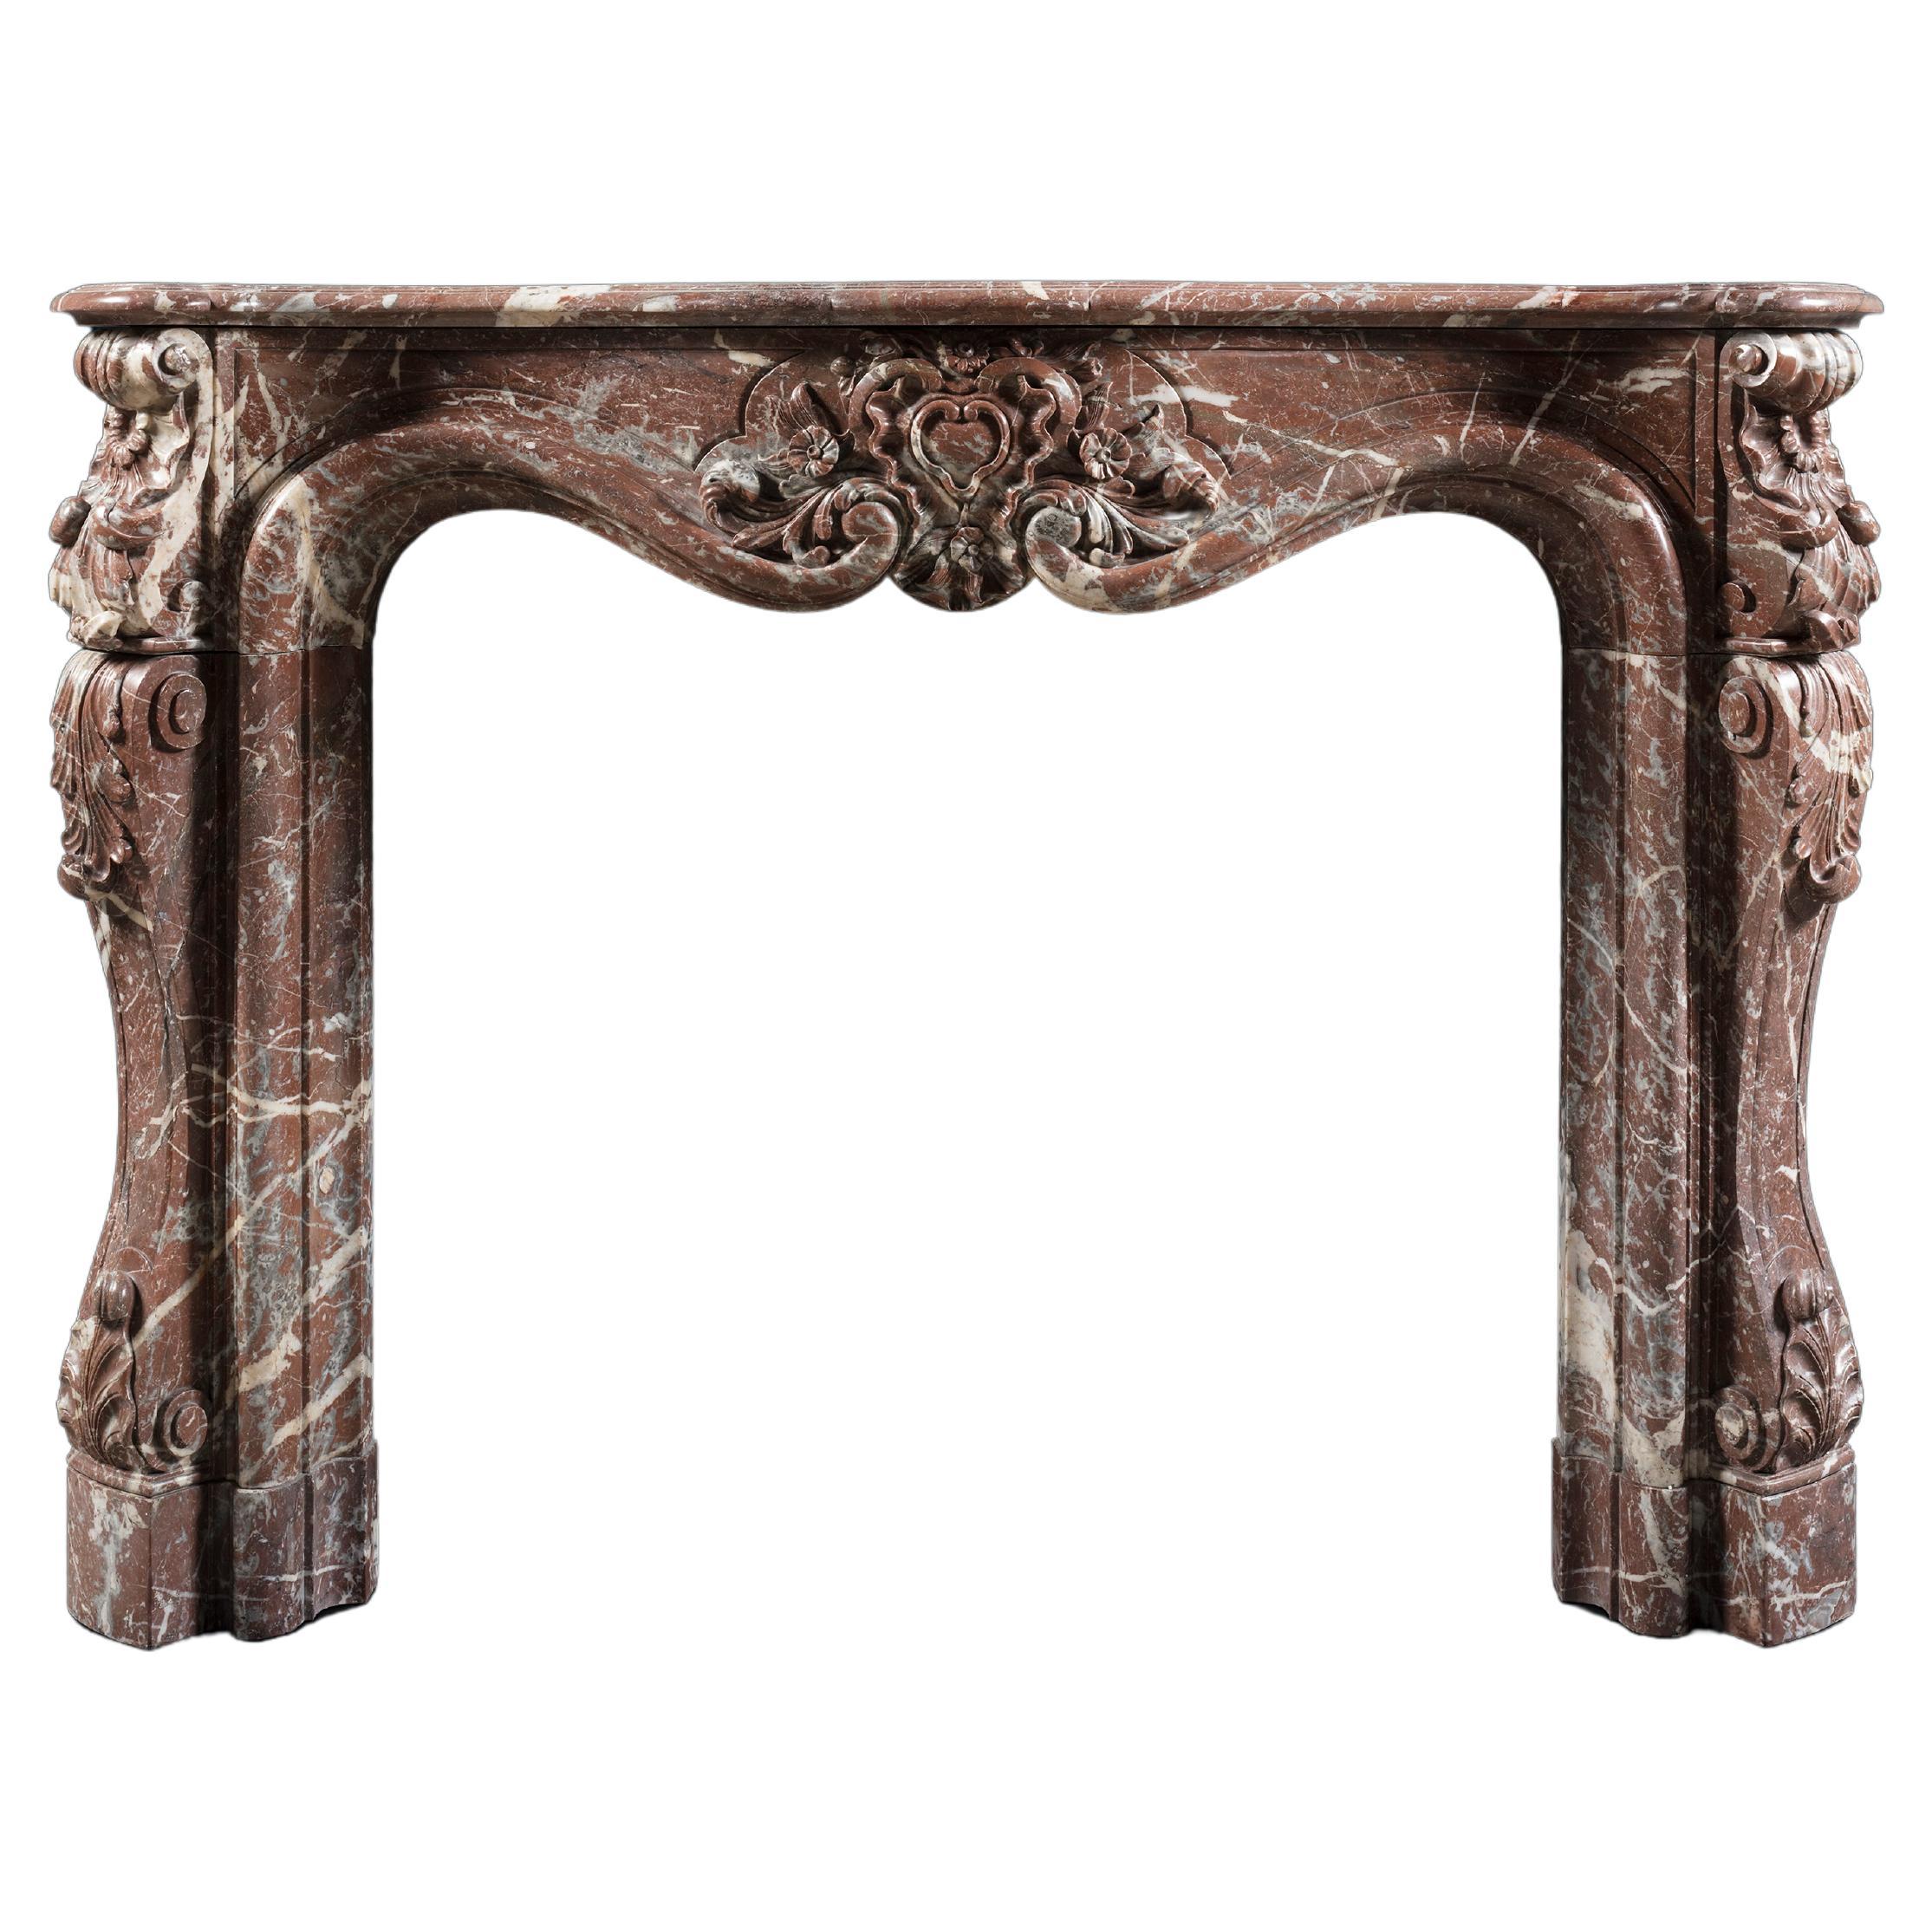 A Louis XV style Rococo Chimneypiece in Rosso Antico Marble